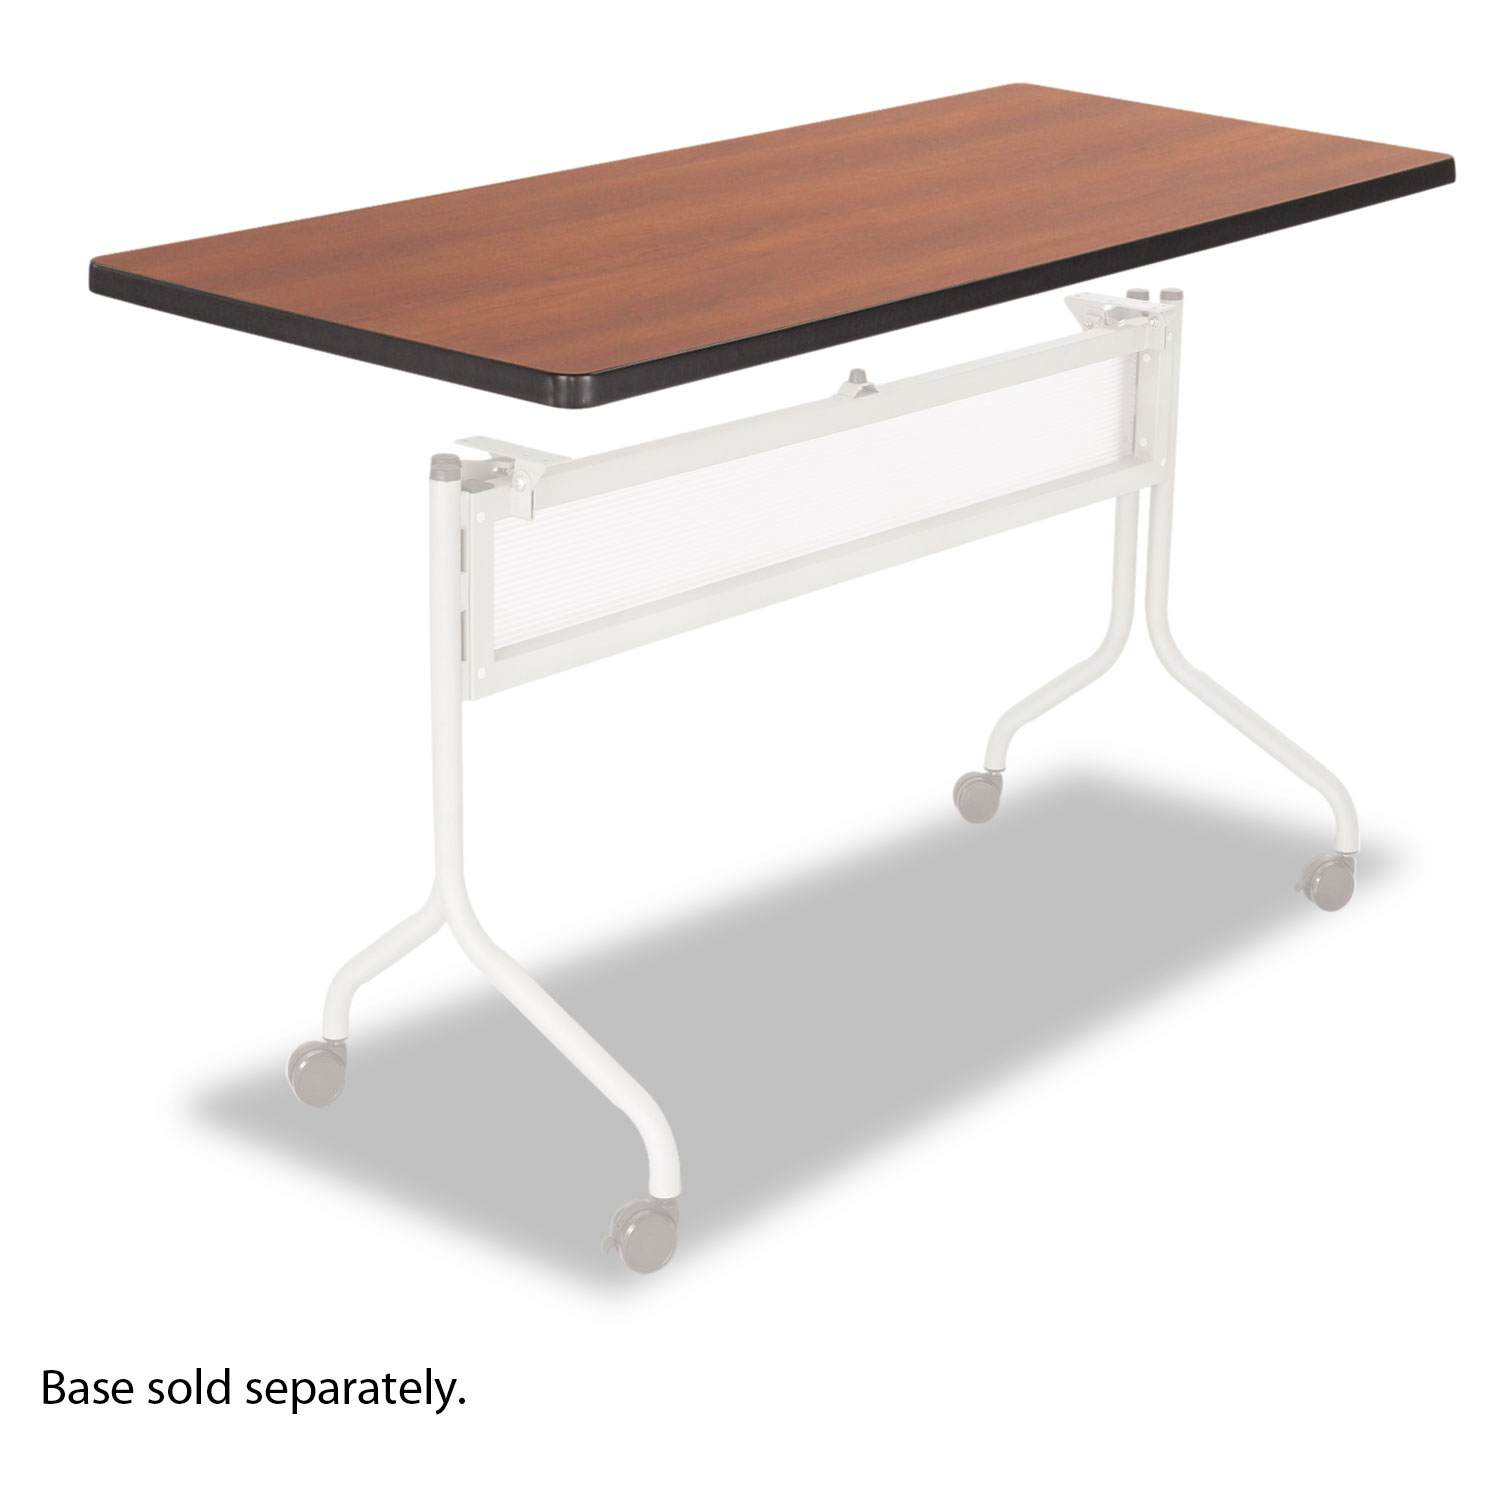 Safco SAF2065CY Impromptu Series Mobile Training Table Top, Rectangular, 48w x 24d, Cherry